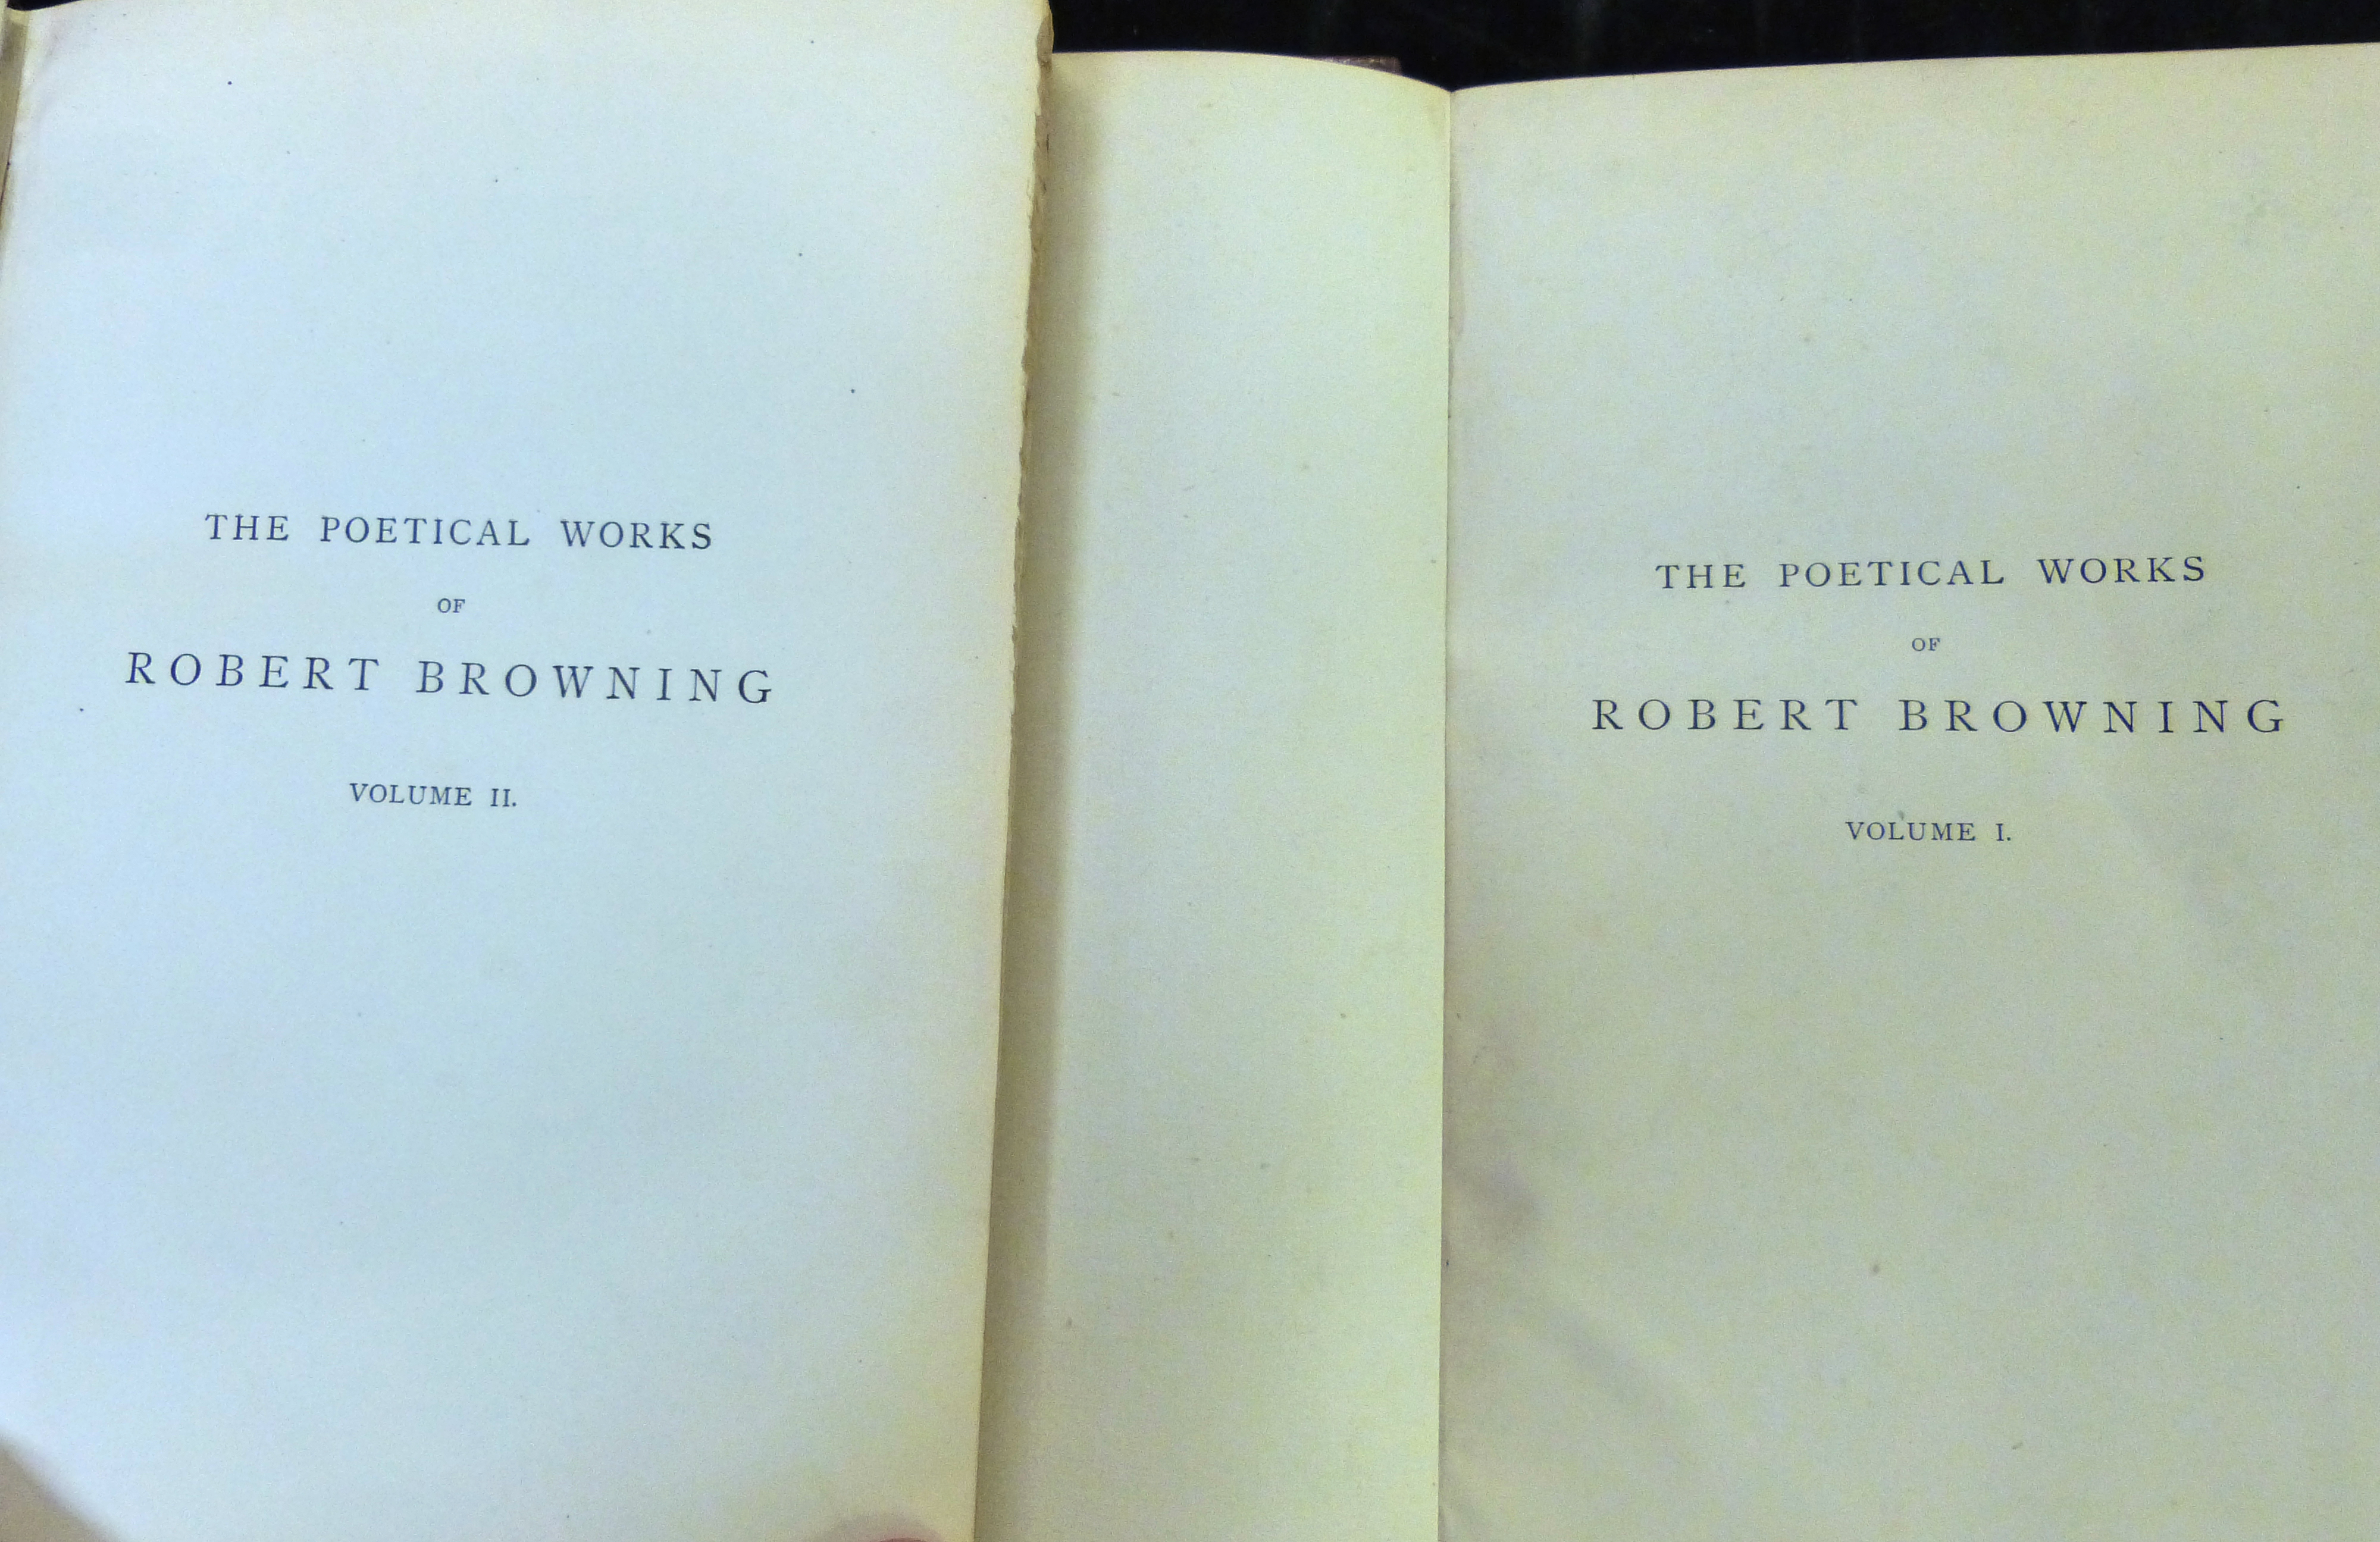 ROBERT BROWNING: THE POETICAL WORKS, London, Smith Elder & Co, 1896, 2 vols, portfrontispieces,